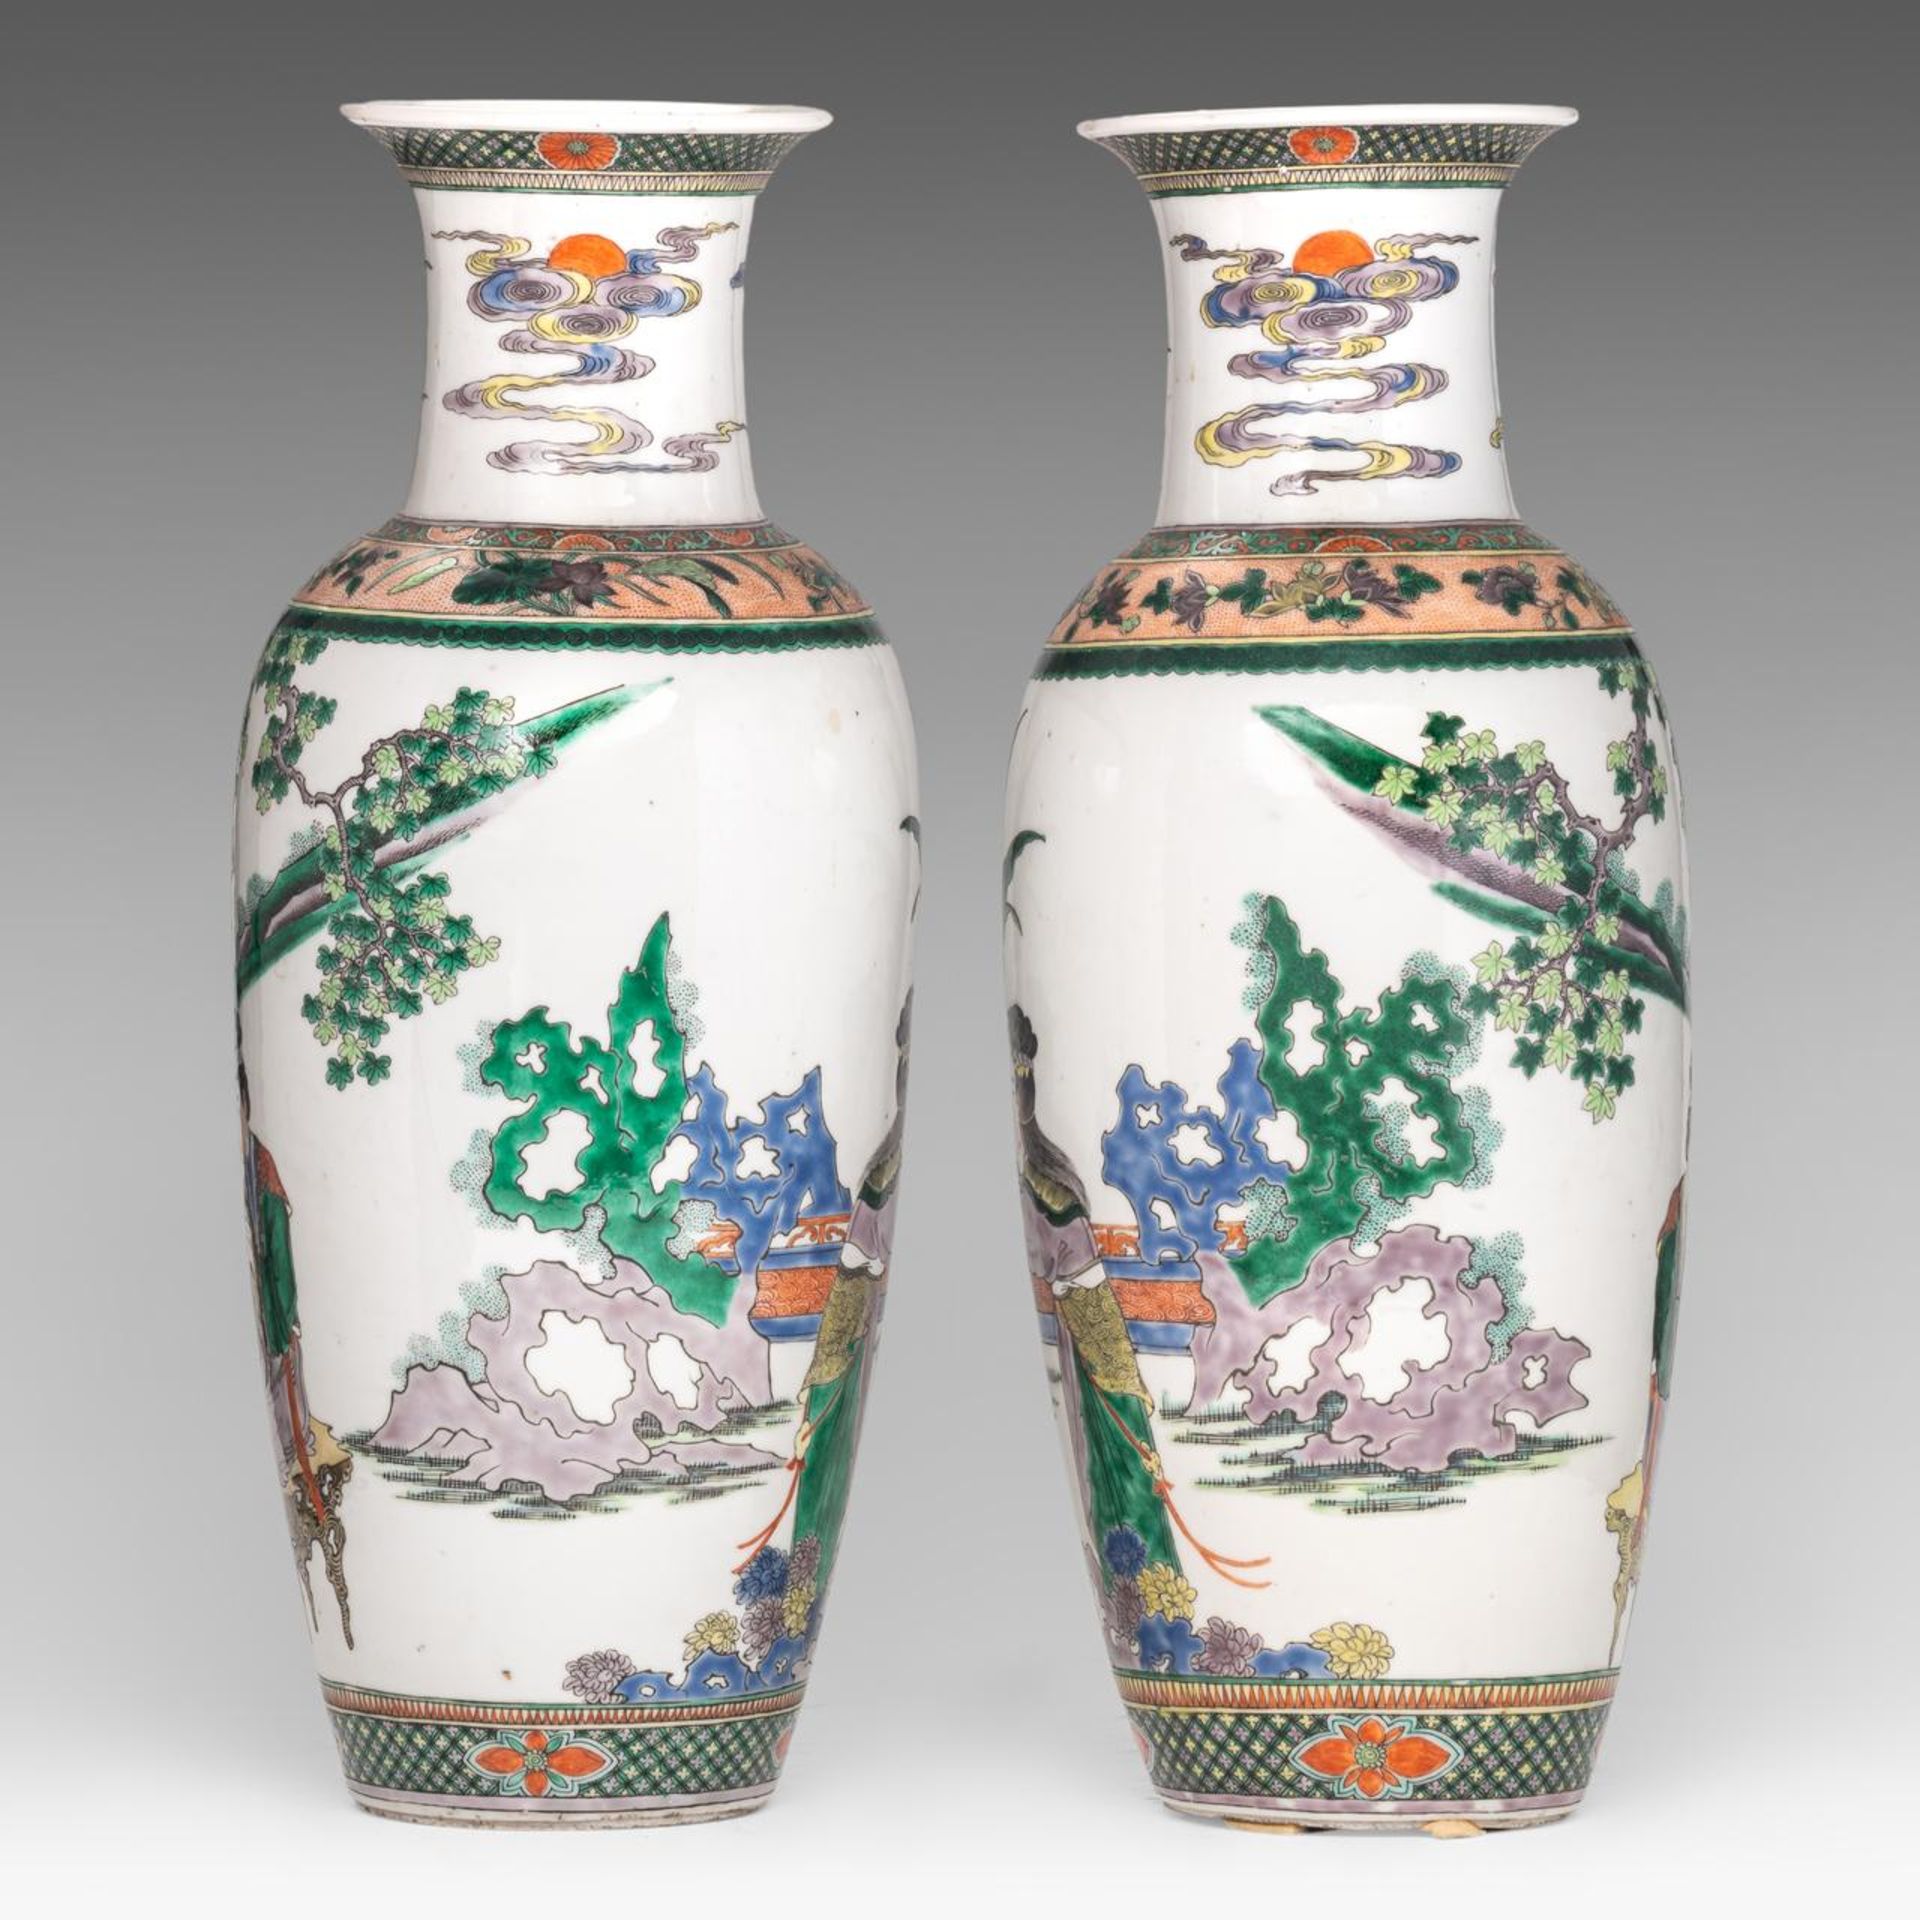 A pair of Chinese famille verte 'Ladies in a garden' vases, Guangxu/ Republic period, H 46,5 cm - Image 3 of 6